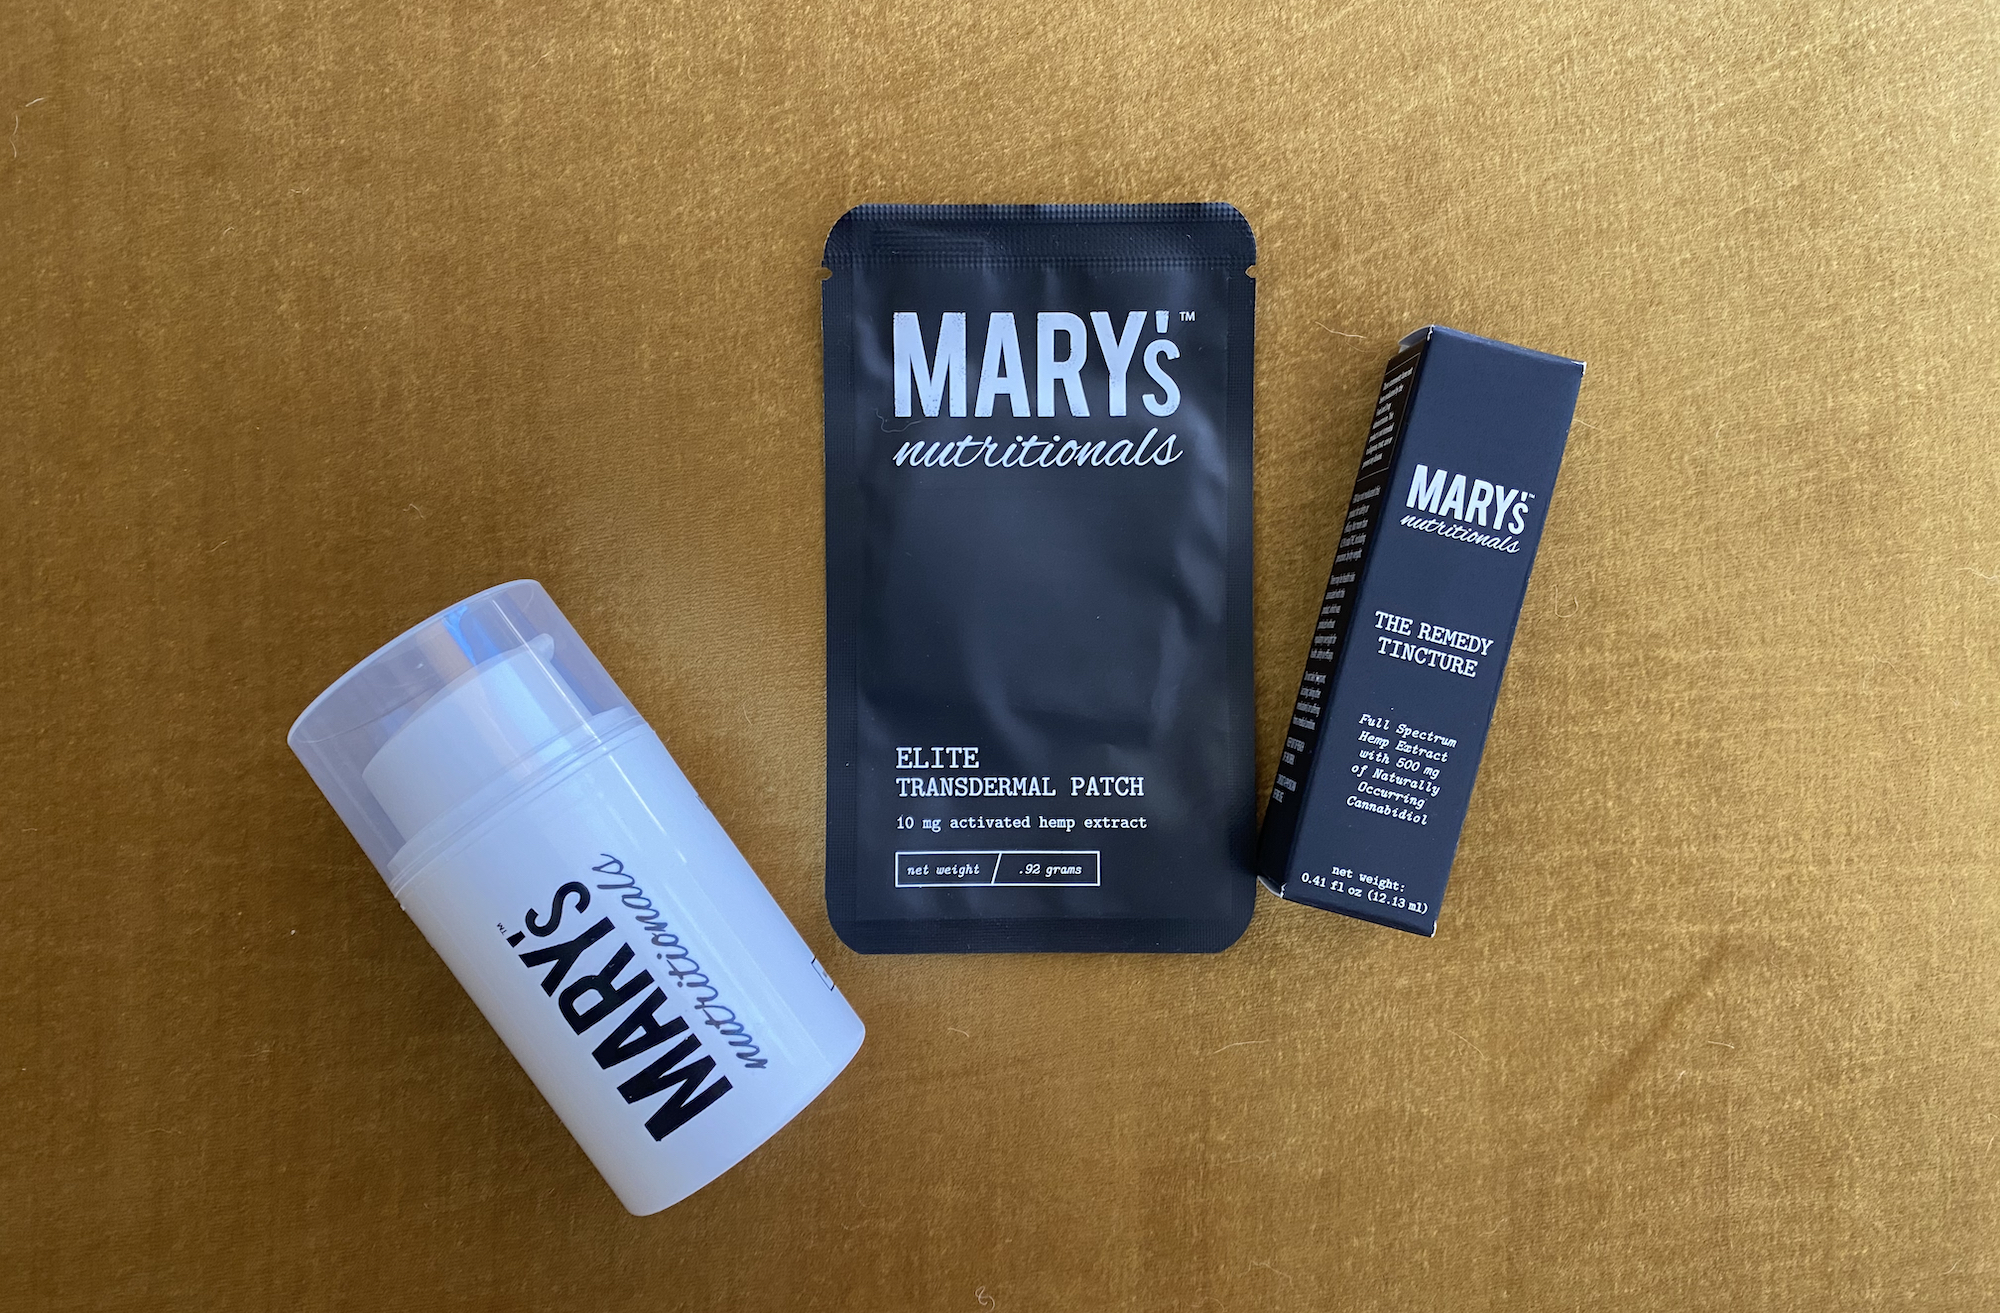 Mary's Nutritionals CBD review